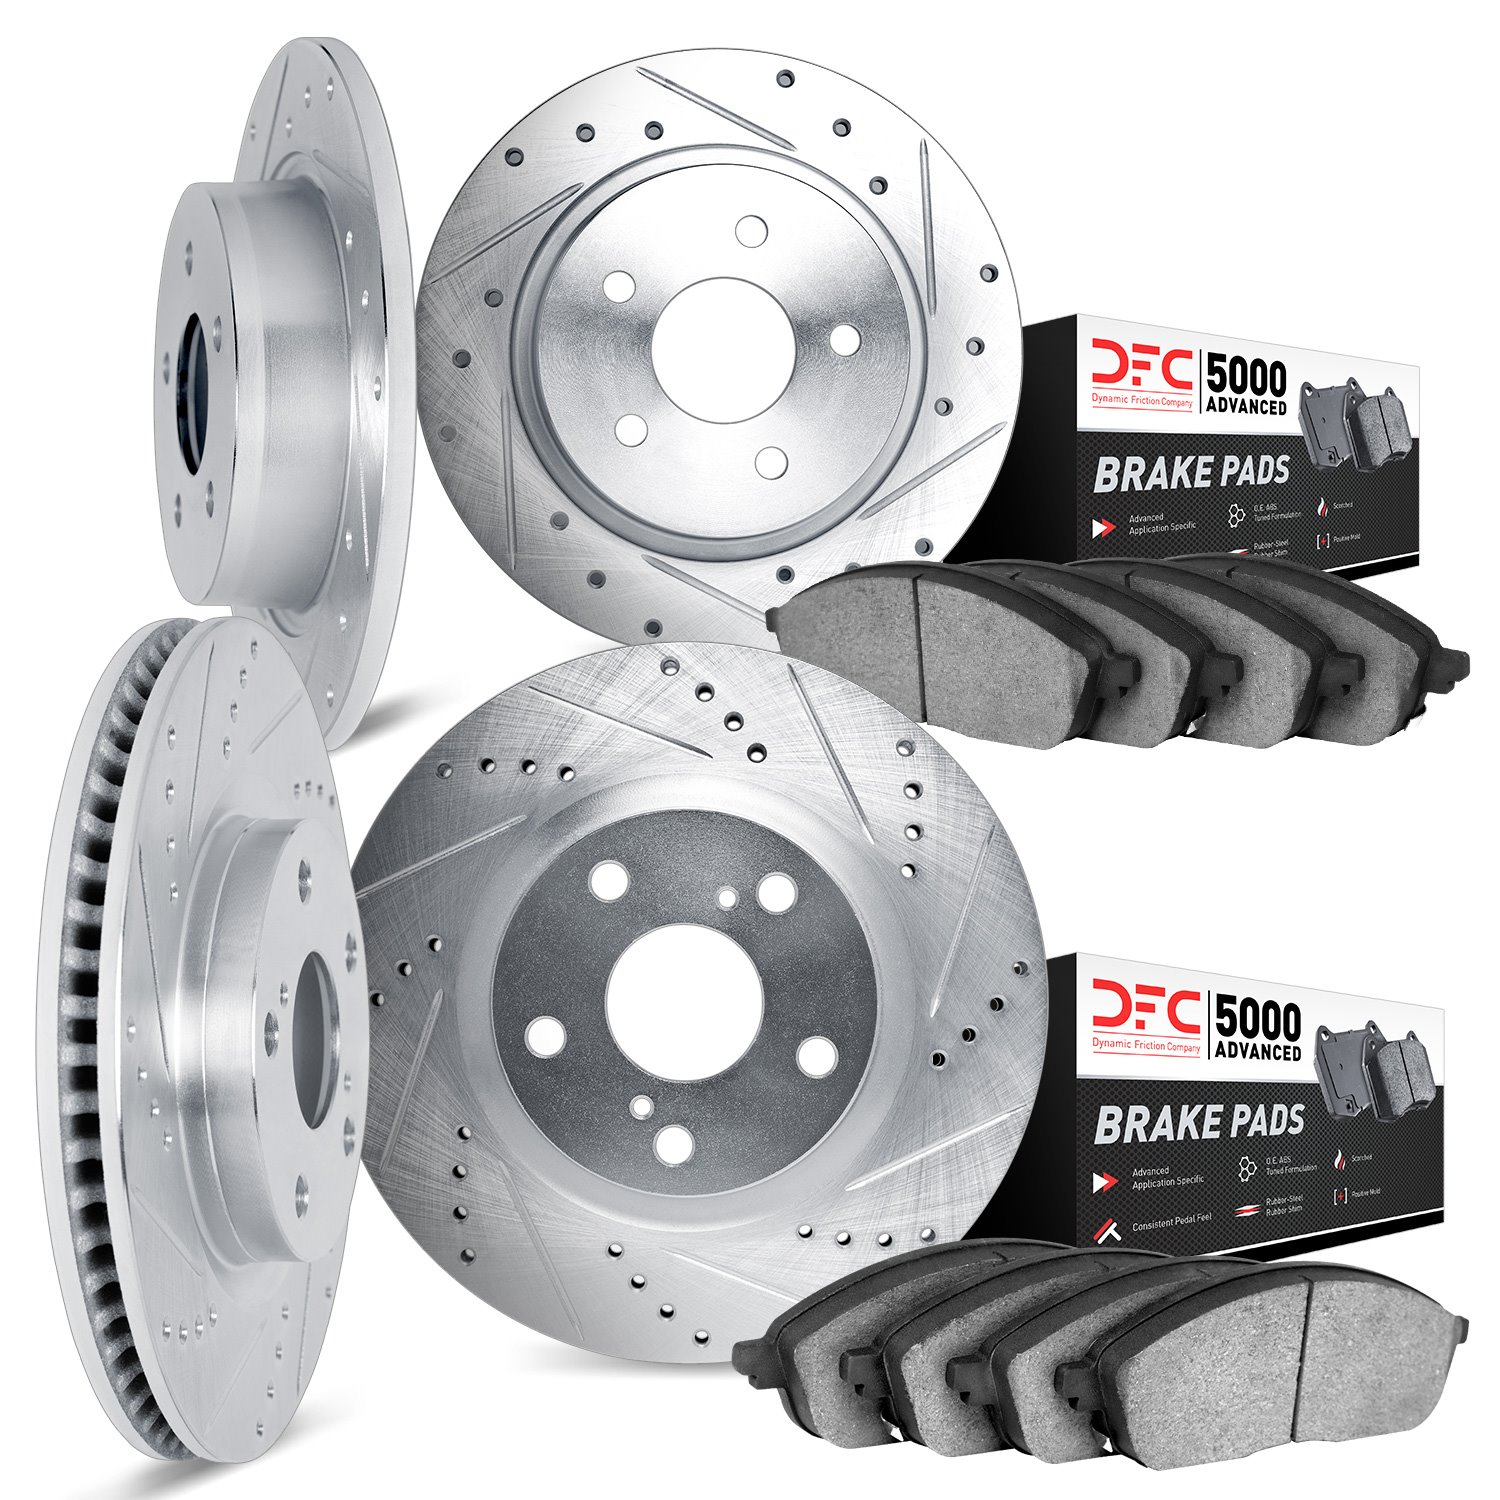 7504-54347 Drilled/Slotted Brake Rotors w/5000 Advanced Brake Pads Kit [Silver], 2006-2010 Ford/Lincoln/Mercury/Mazda, Position: